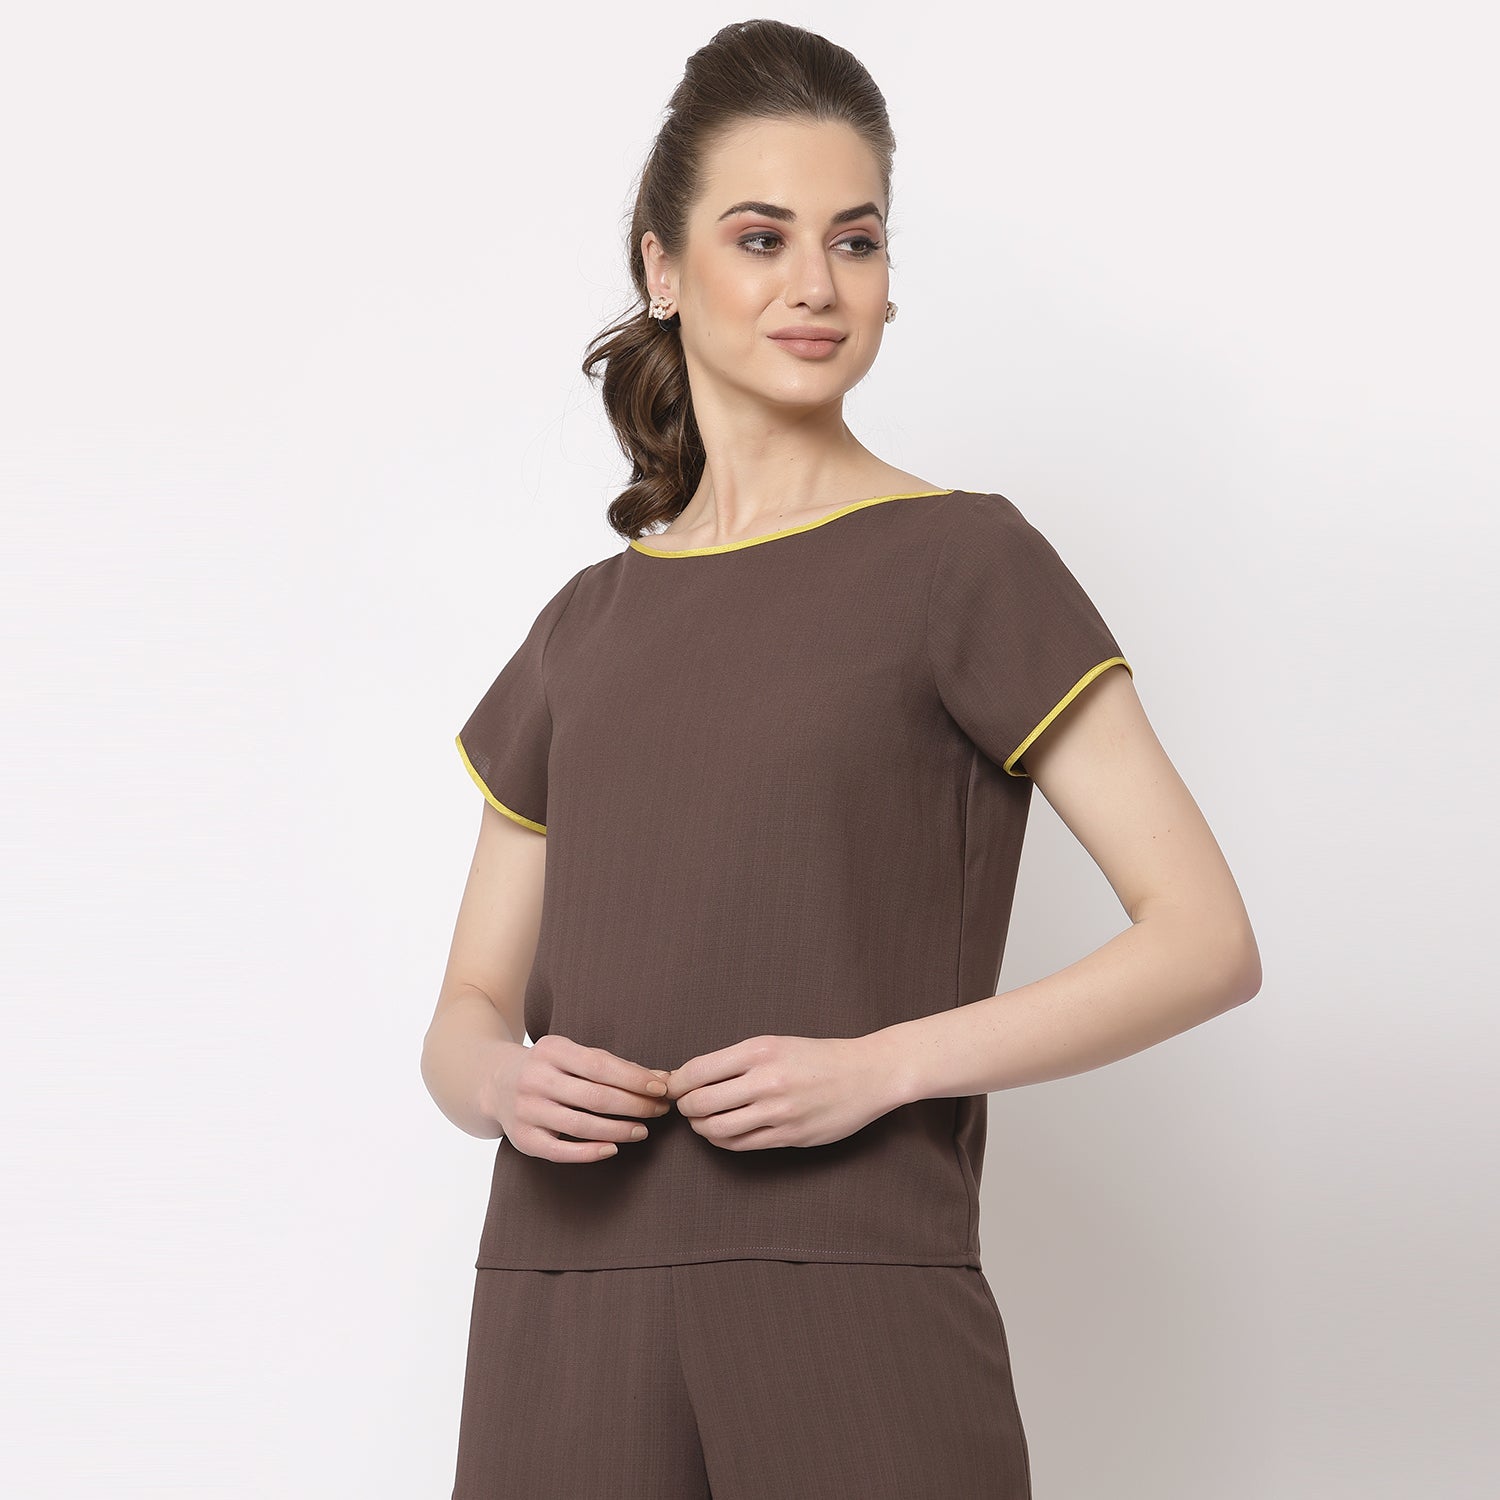 Brown boat neck top with yellow piping